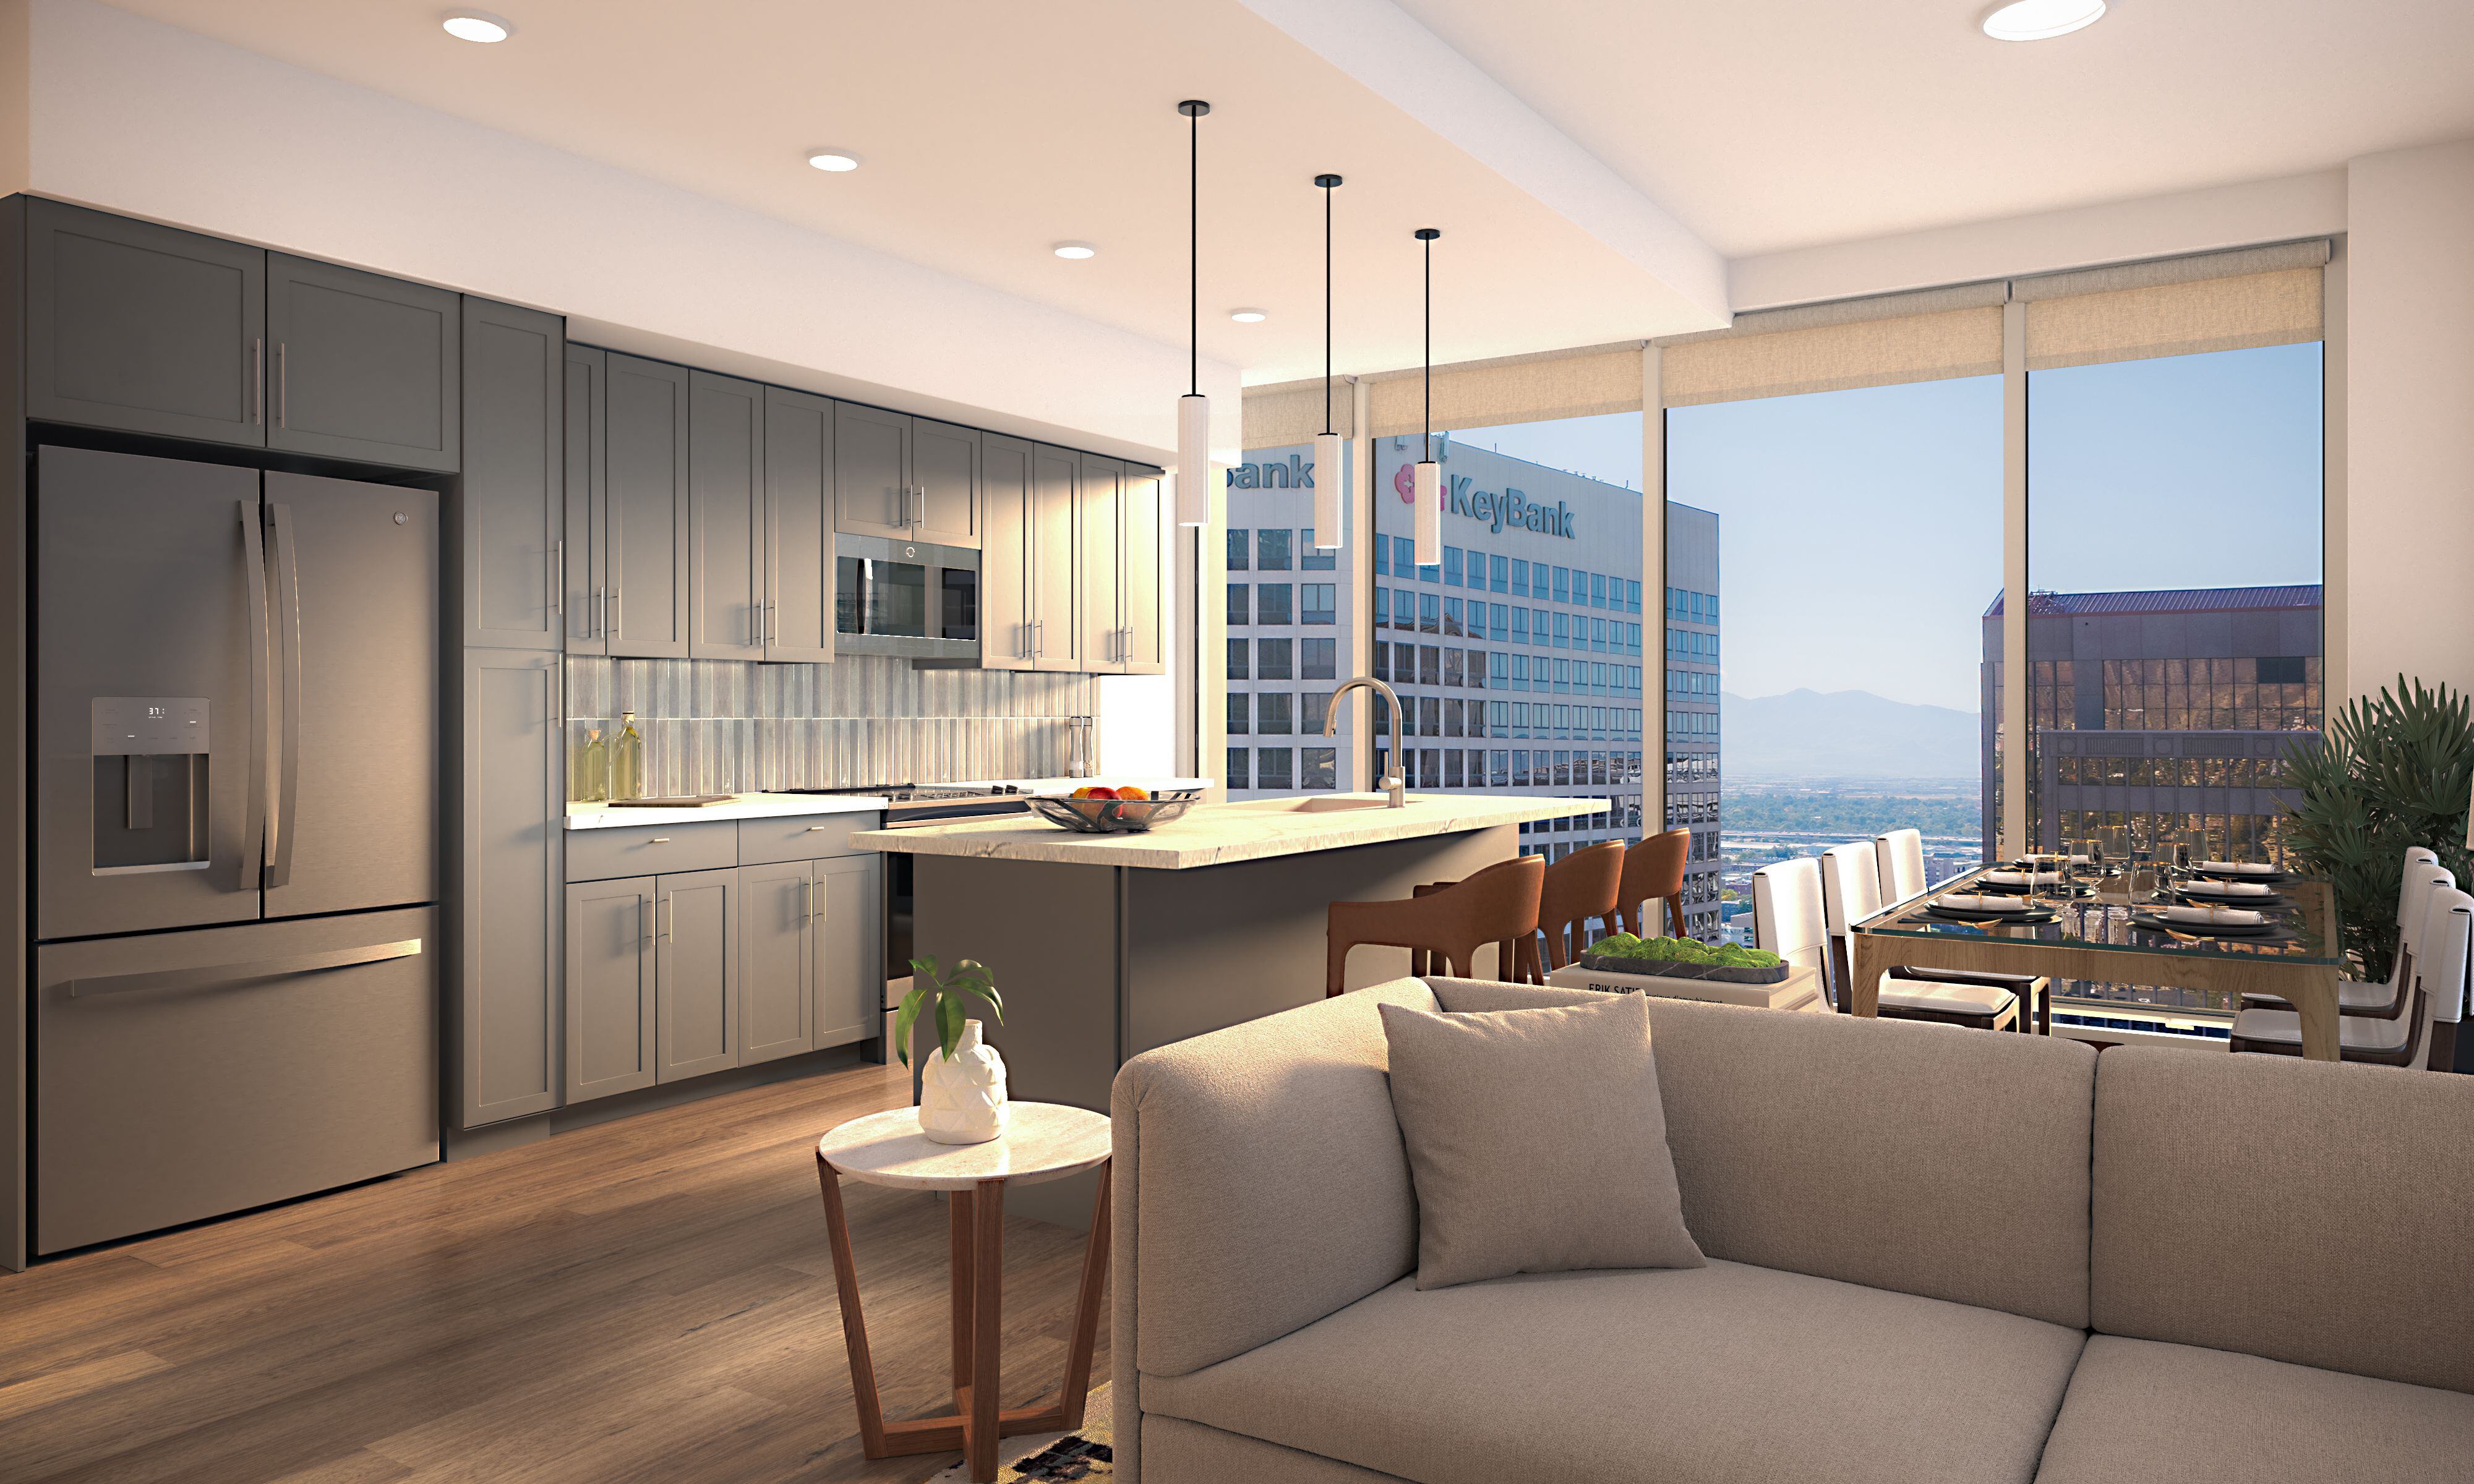 (Hines) Rendering of a one-bedroom dwelling among the 217 luxury apartments planned inside South Temple Tower, part of an office-to-residential remake of 136 E. South Temple in Salt Lake City.